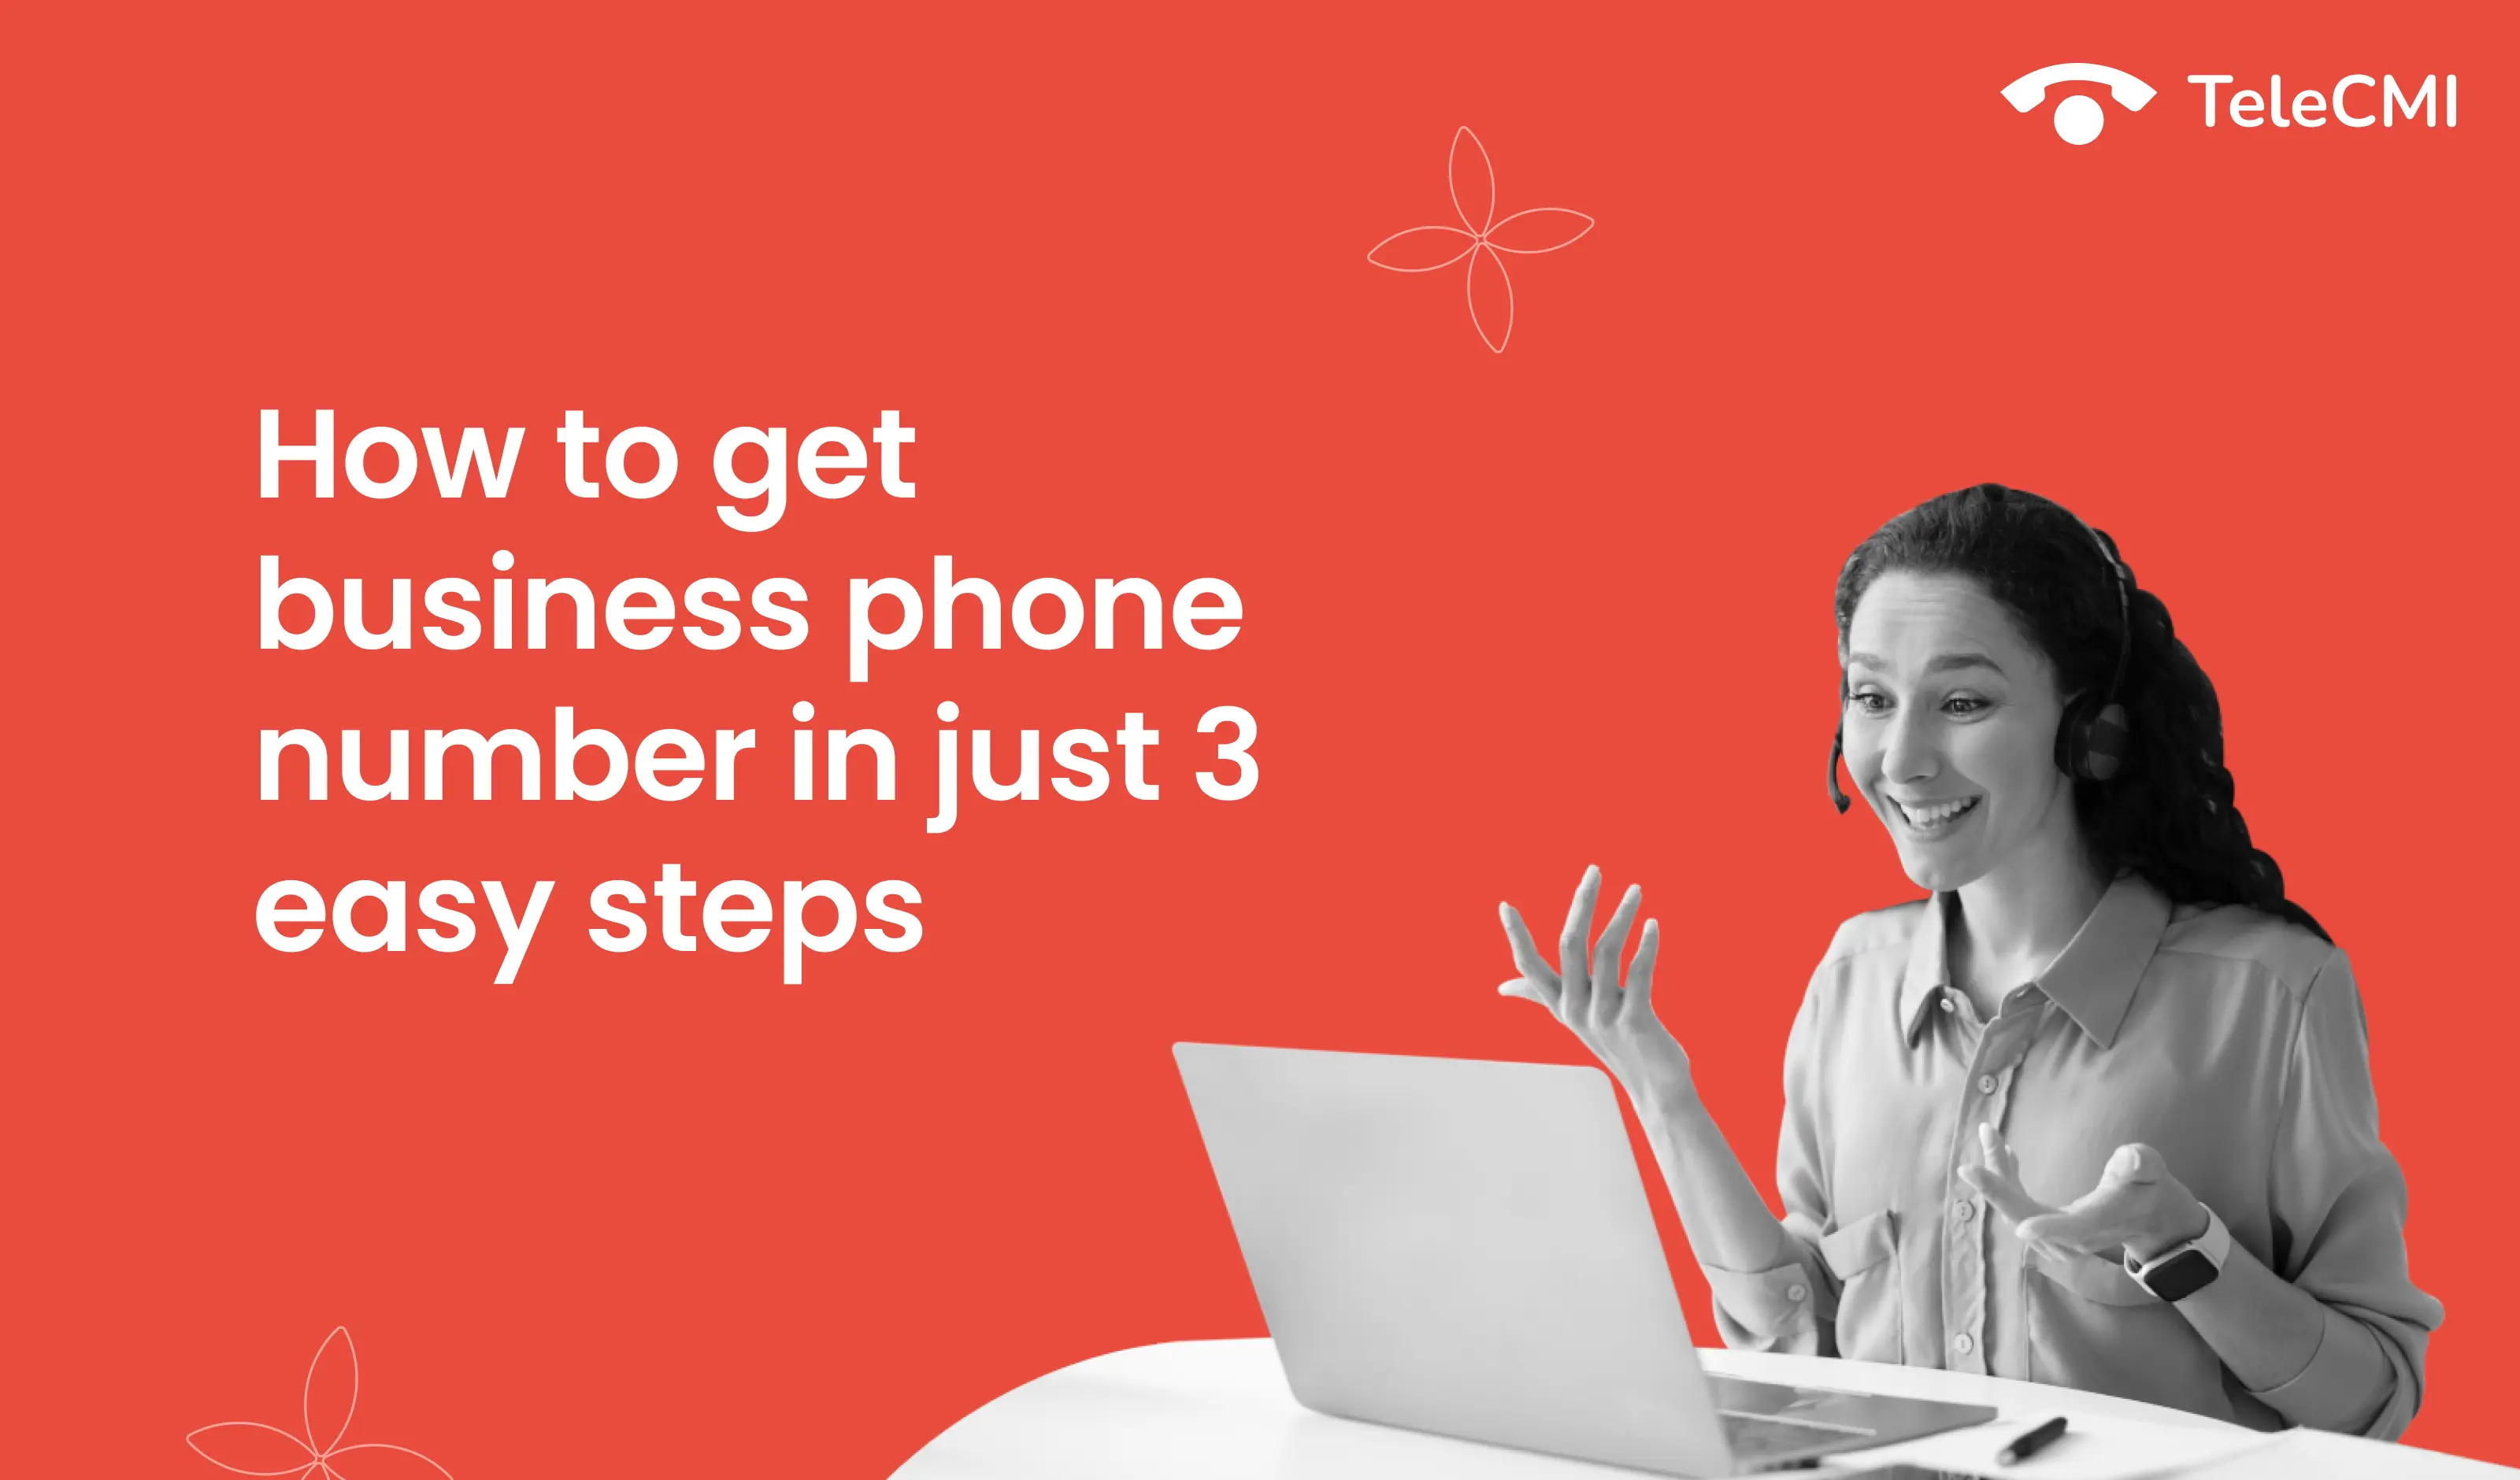 Business Phone Number: How to get it in 3 easy steps